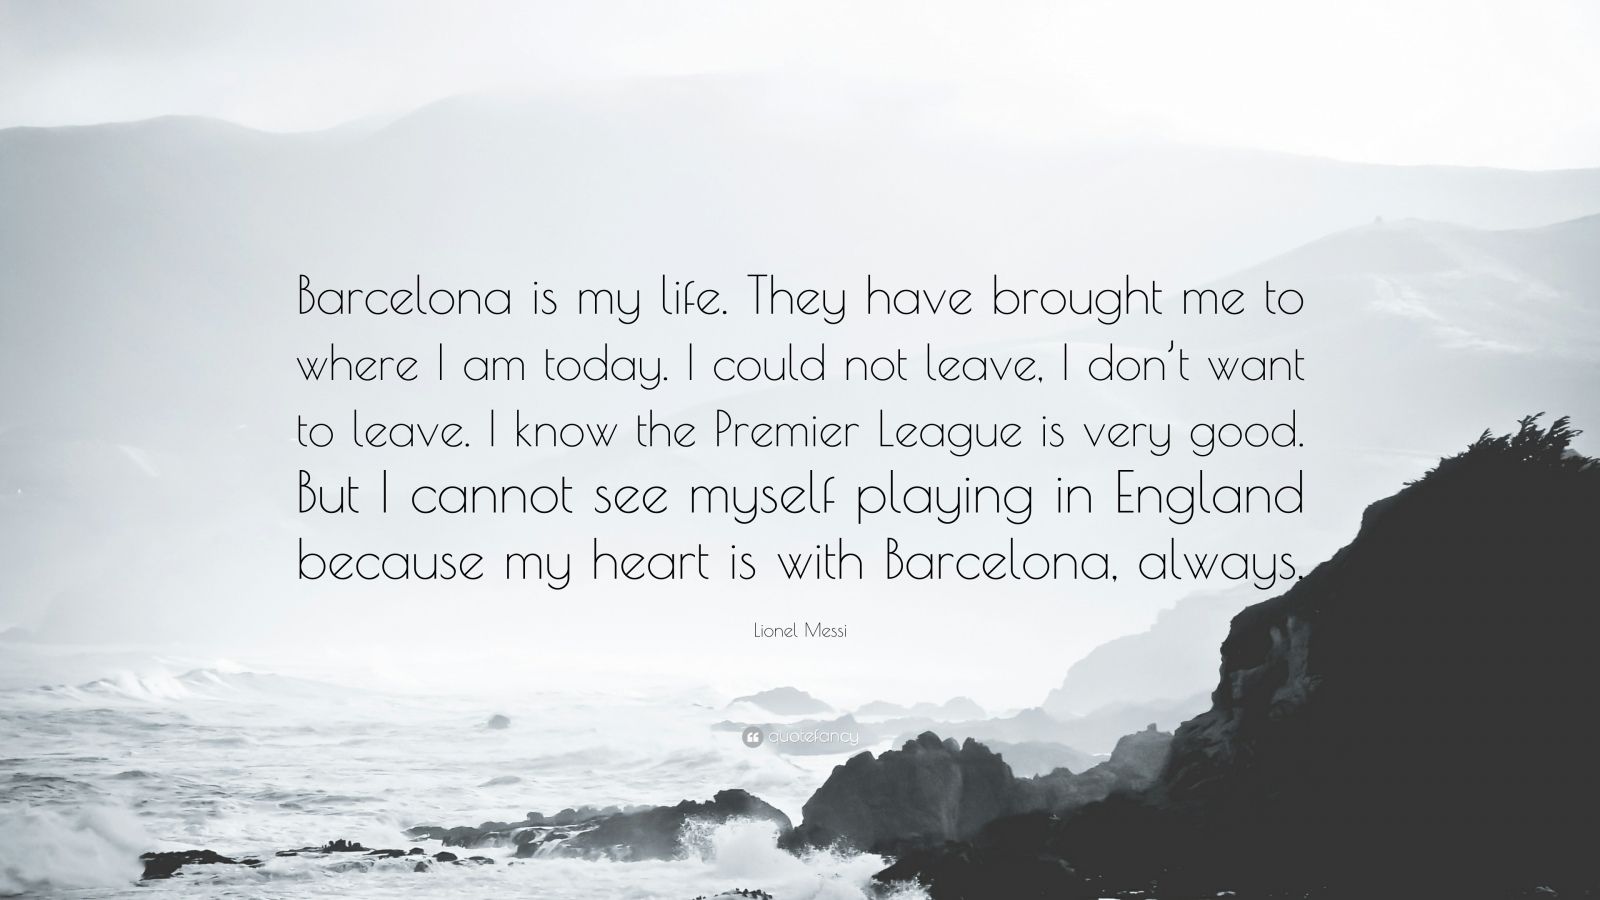 Lionel Messi Quote “Barcelona is my life They have brought me to where